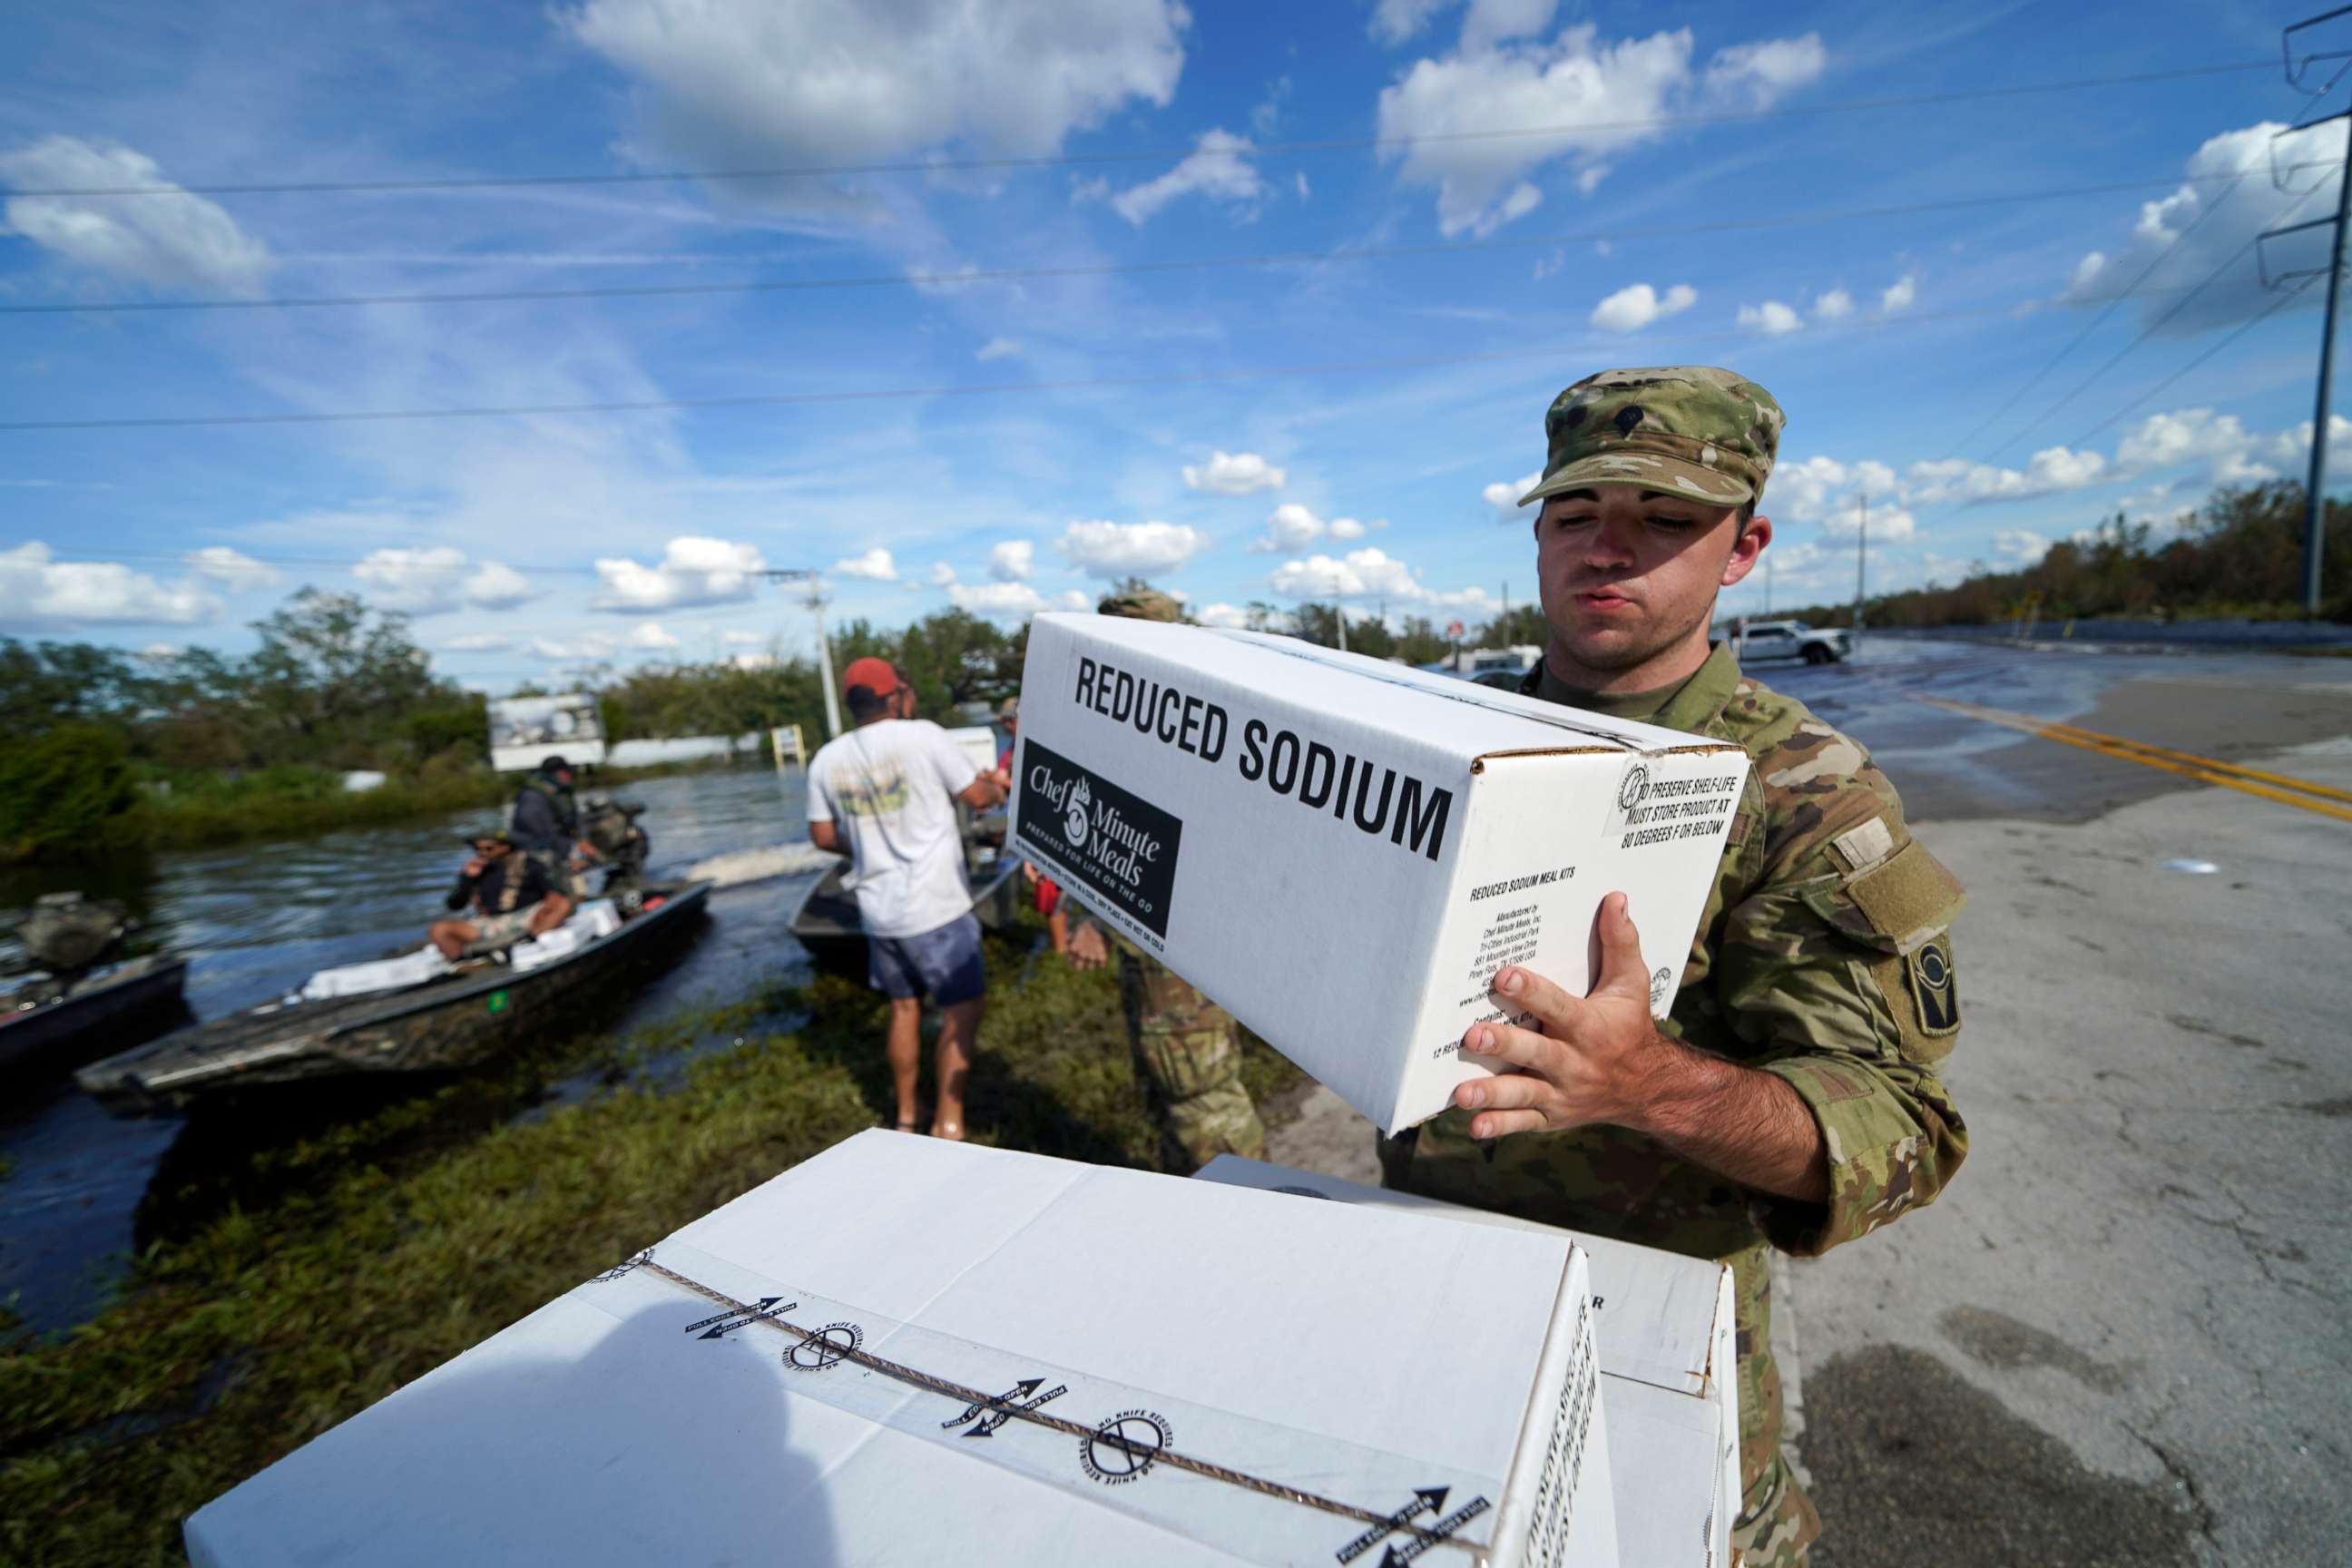 PHOTO: A member of the Florida National Guard helps stack emergency supplies that arrived by boat during flooding along the Peace River in the aftermath of Hurricane Ian in Arcadia, Fla., Oct. 3, 2022.